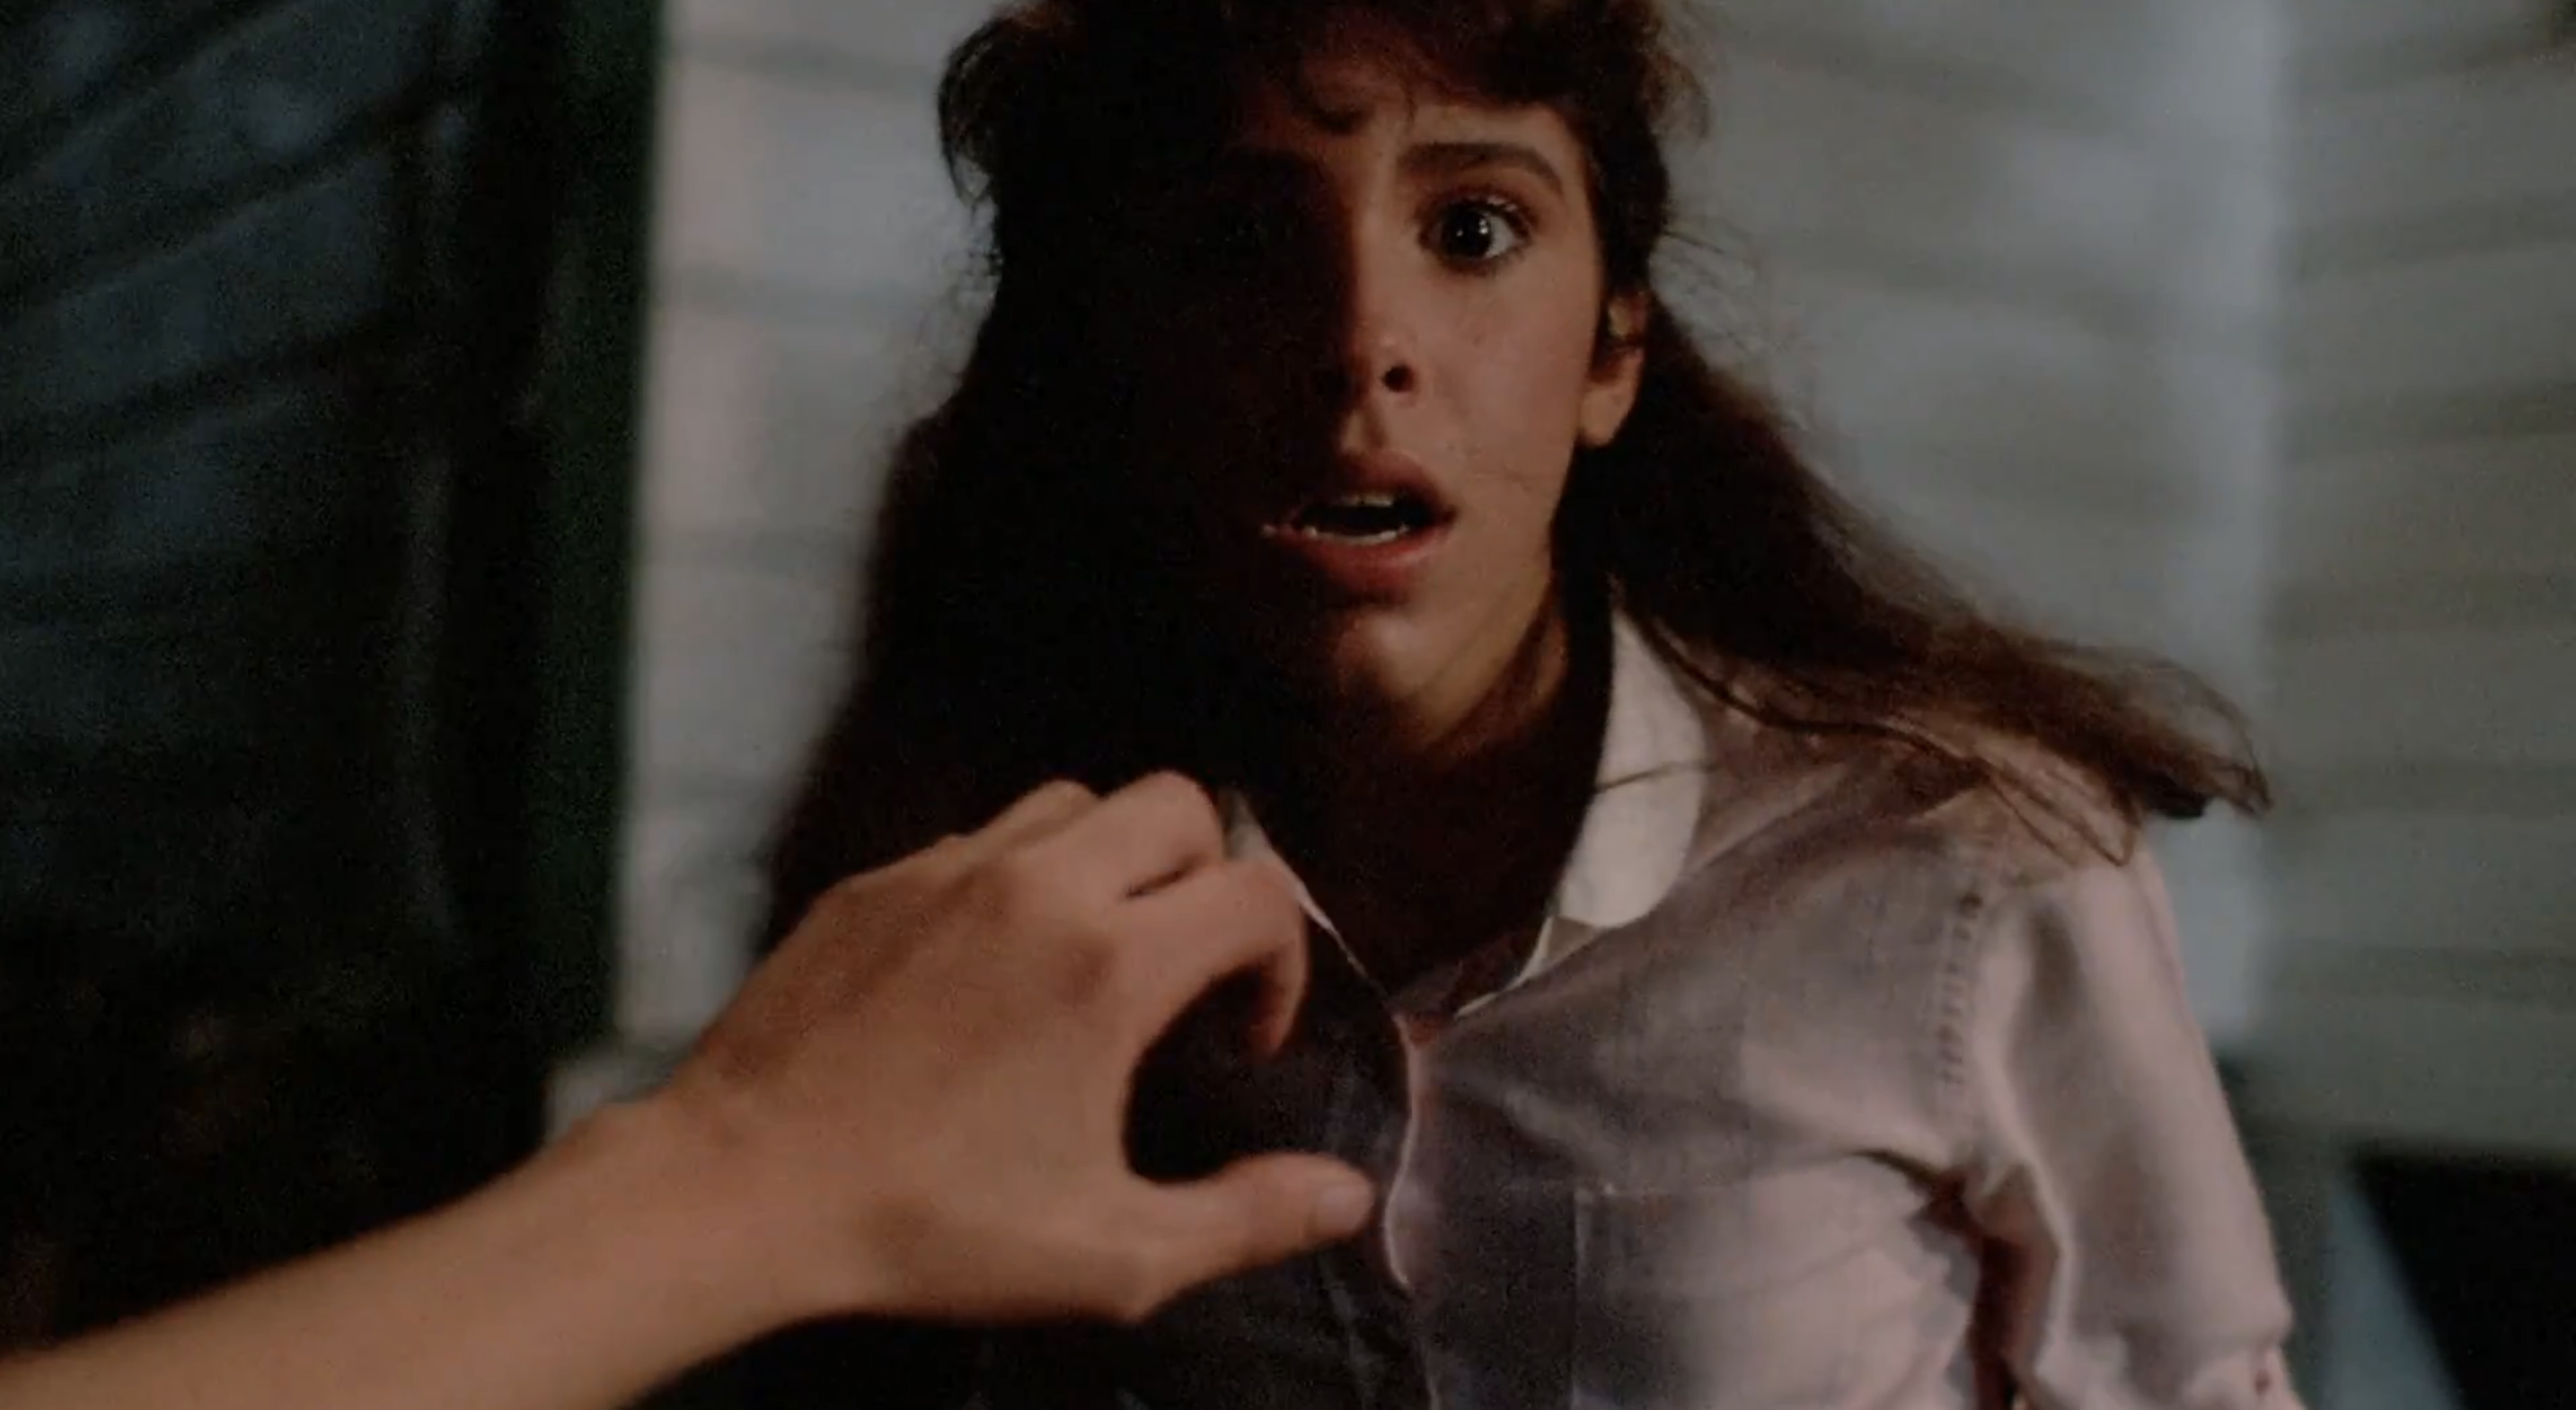 Sleepaway Camp Cast - Every Performer and Character in the 1983 Horror Movie